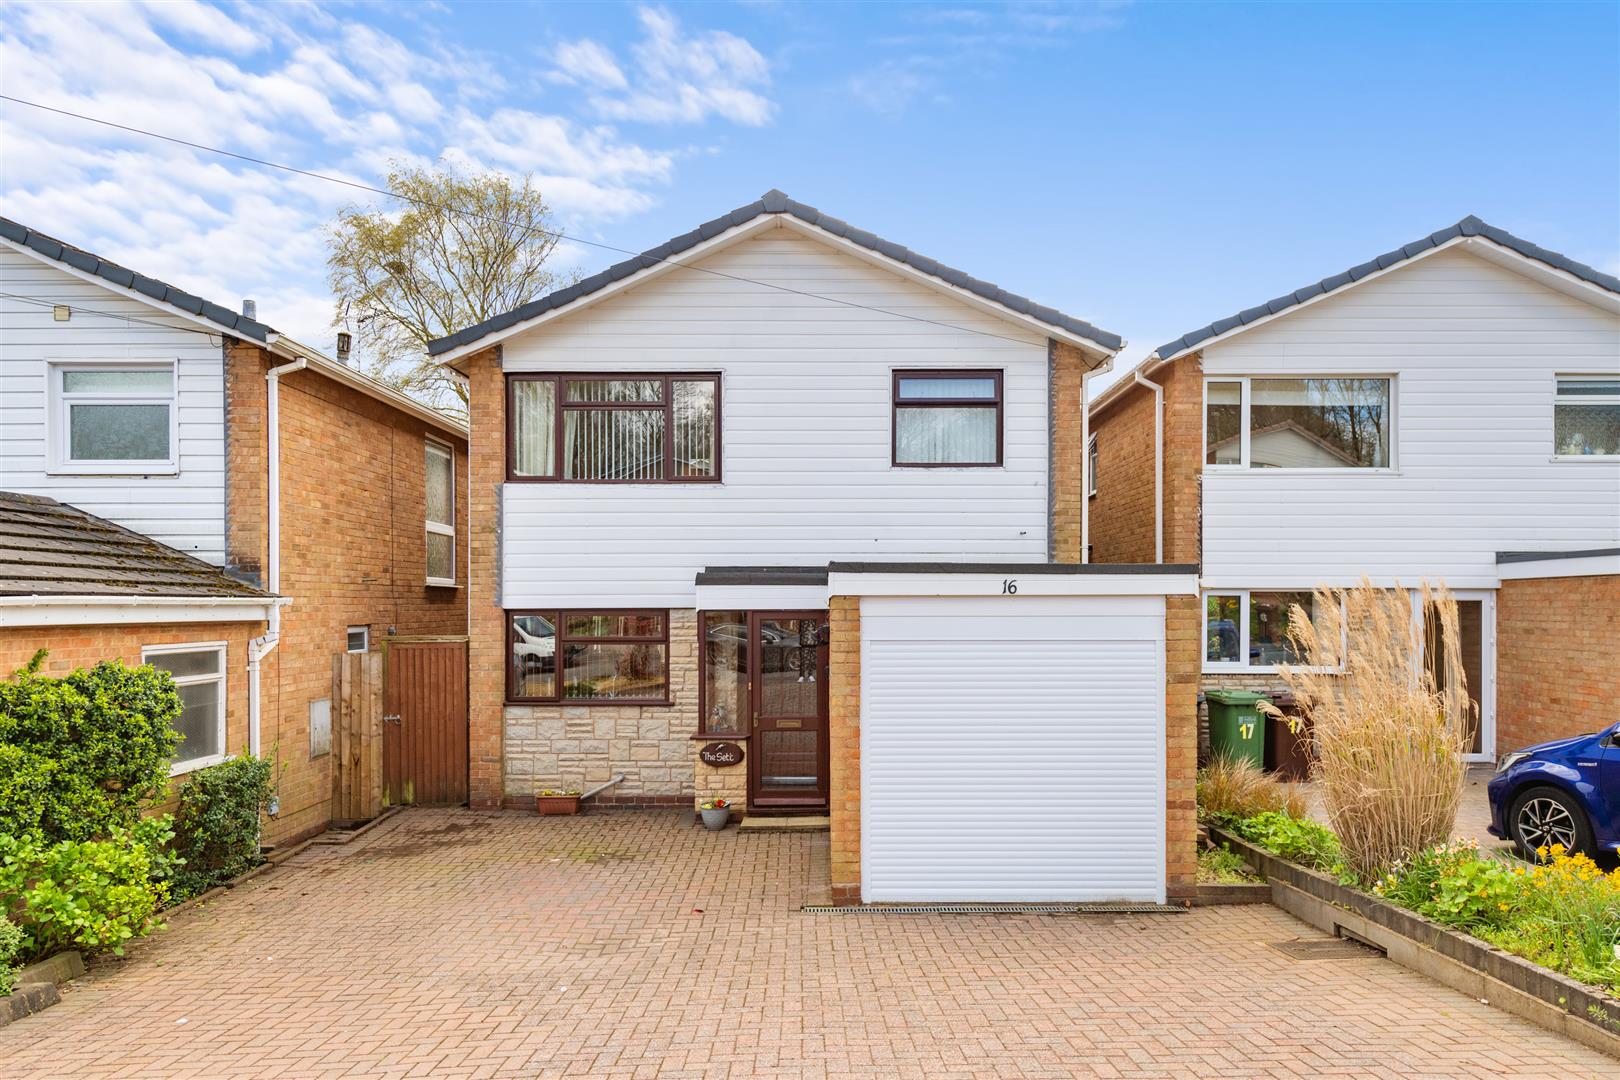 3 bed detached house for sale in Sambourn Close, Solihull  - Property Image 16